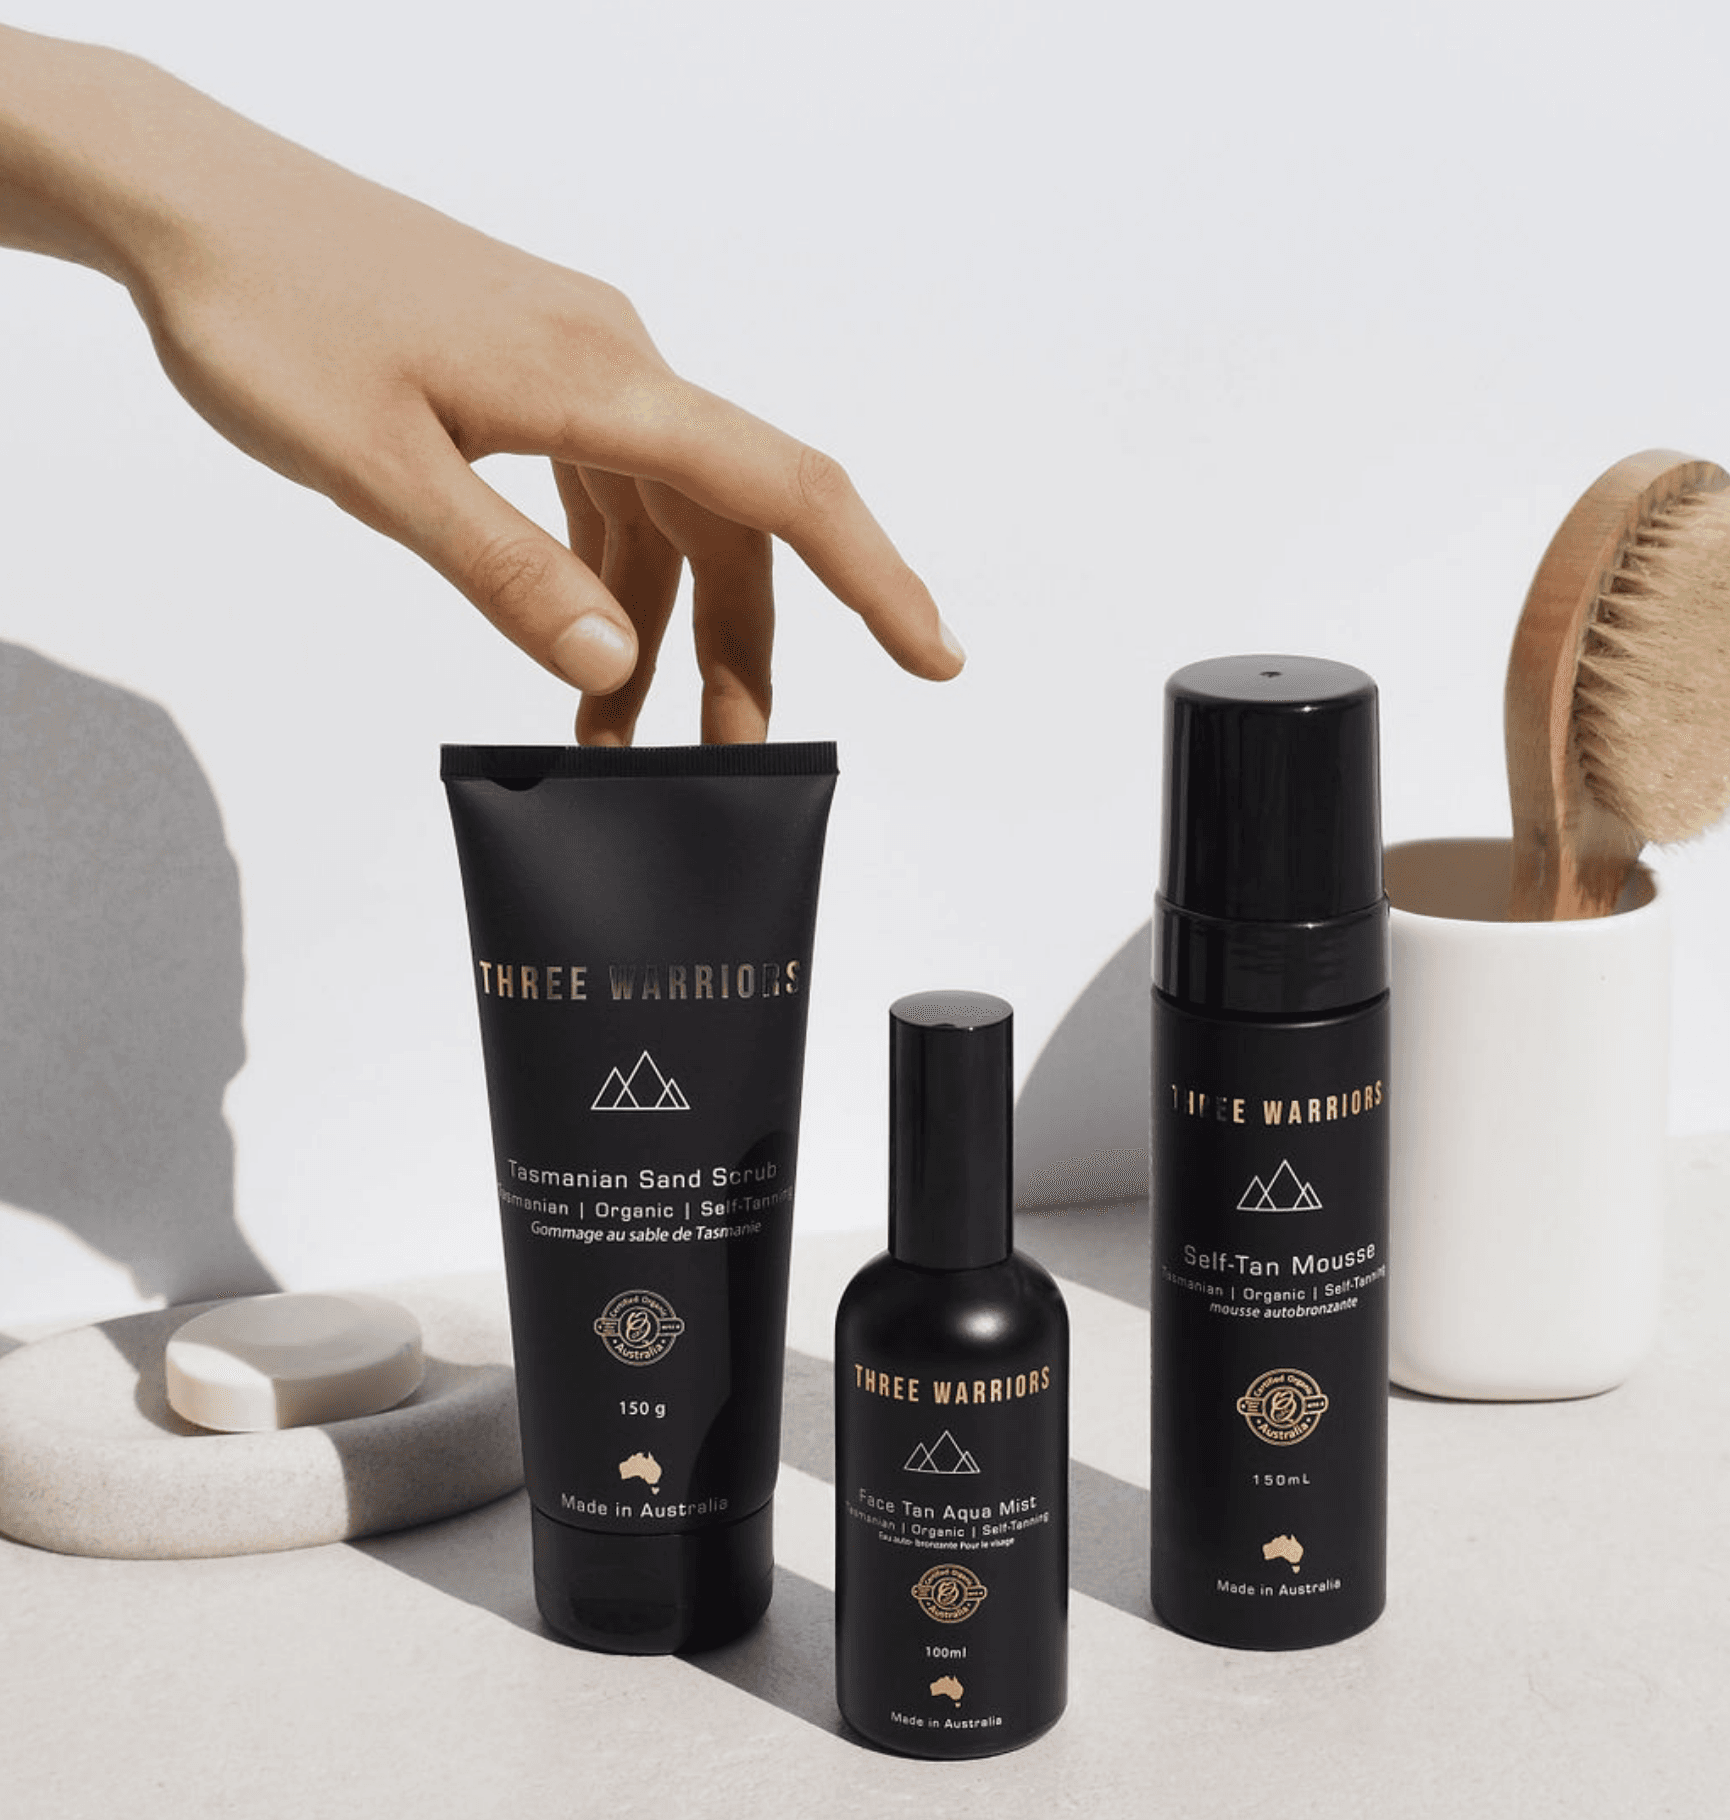 Product Review Three Warriors Self-Tan Mousse